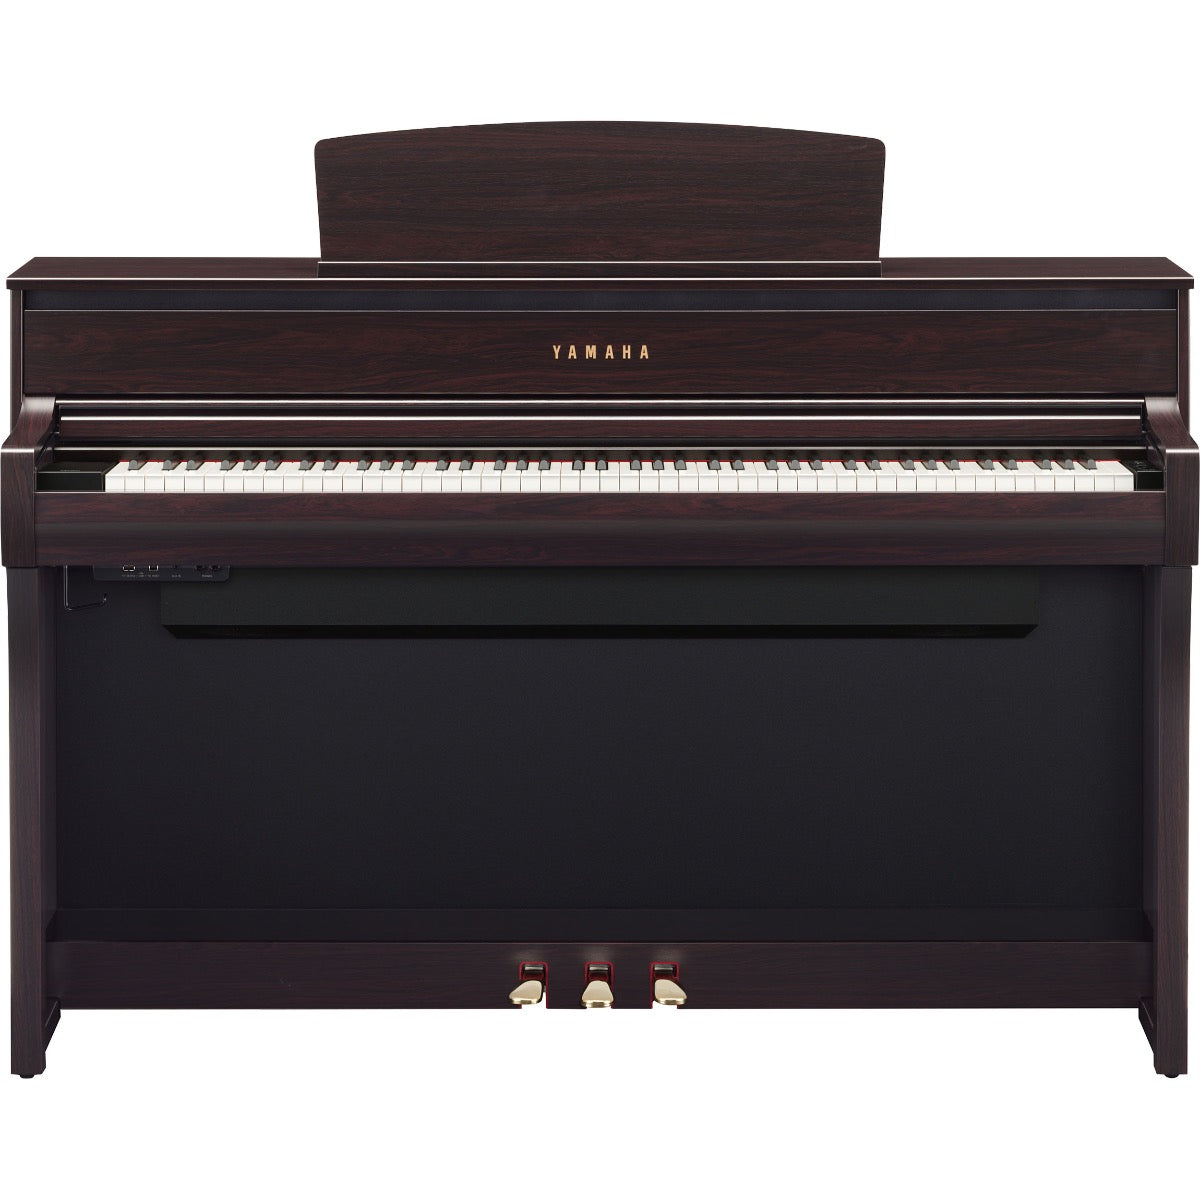 Perspective view of Yamaha Clavinova CLP-775 Digital Piano - Rosewood showing front and top